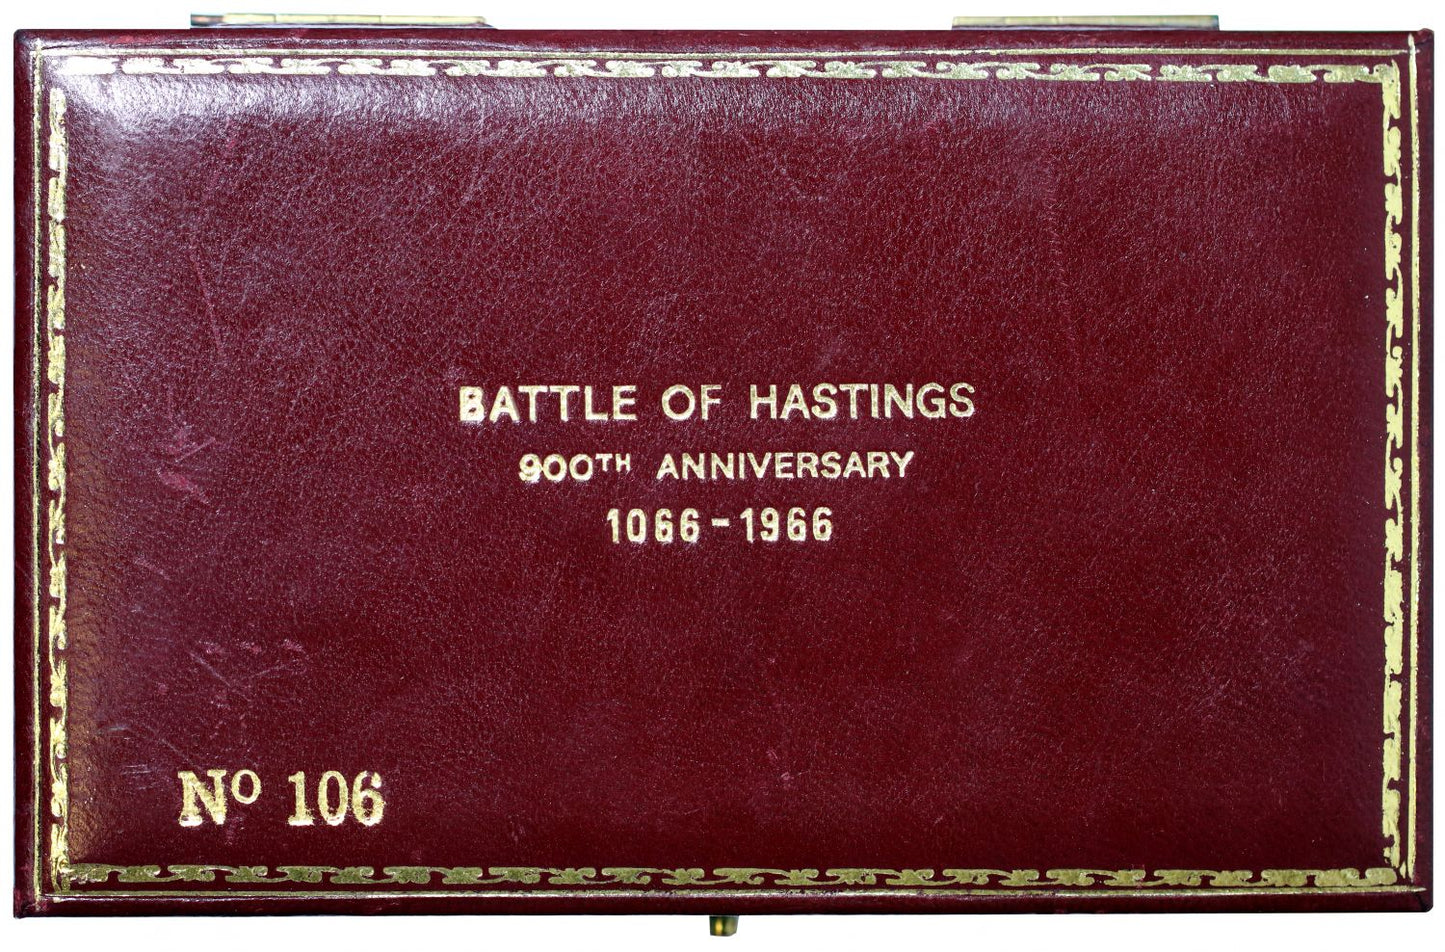 Battle of Hastings 900th Anniversary, two-medal gold Set, 1966.